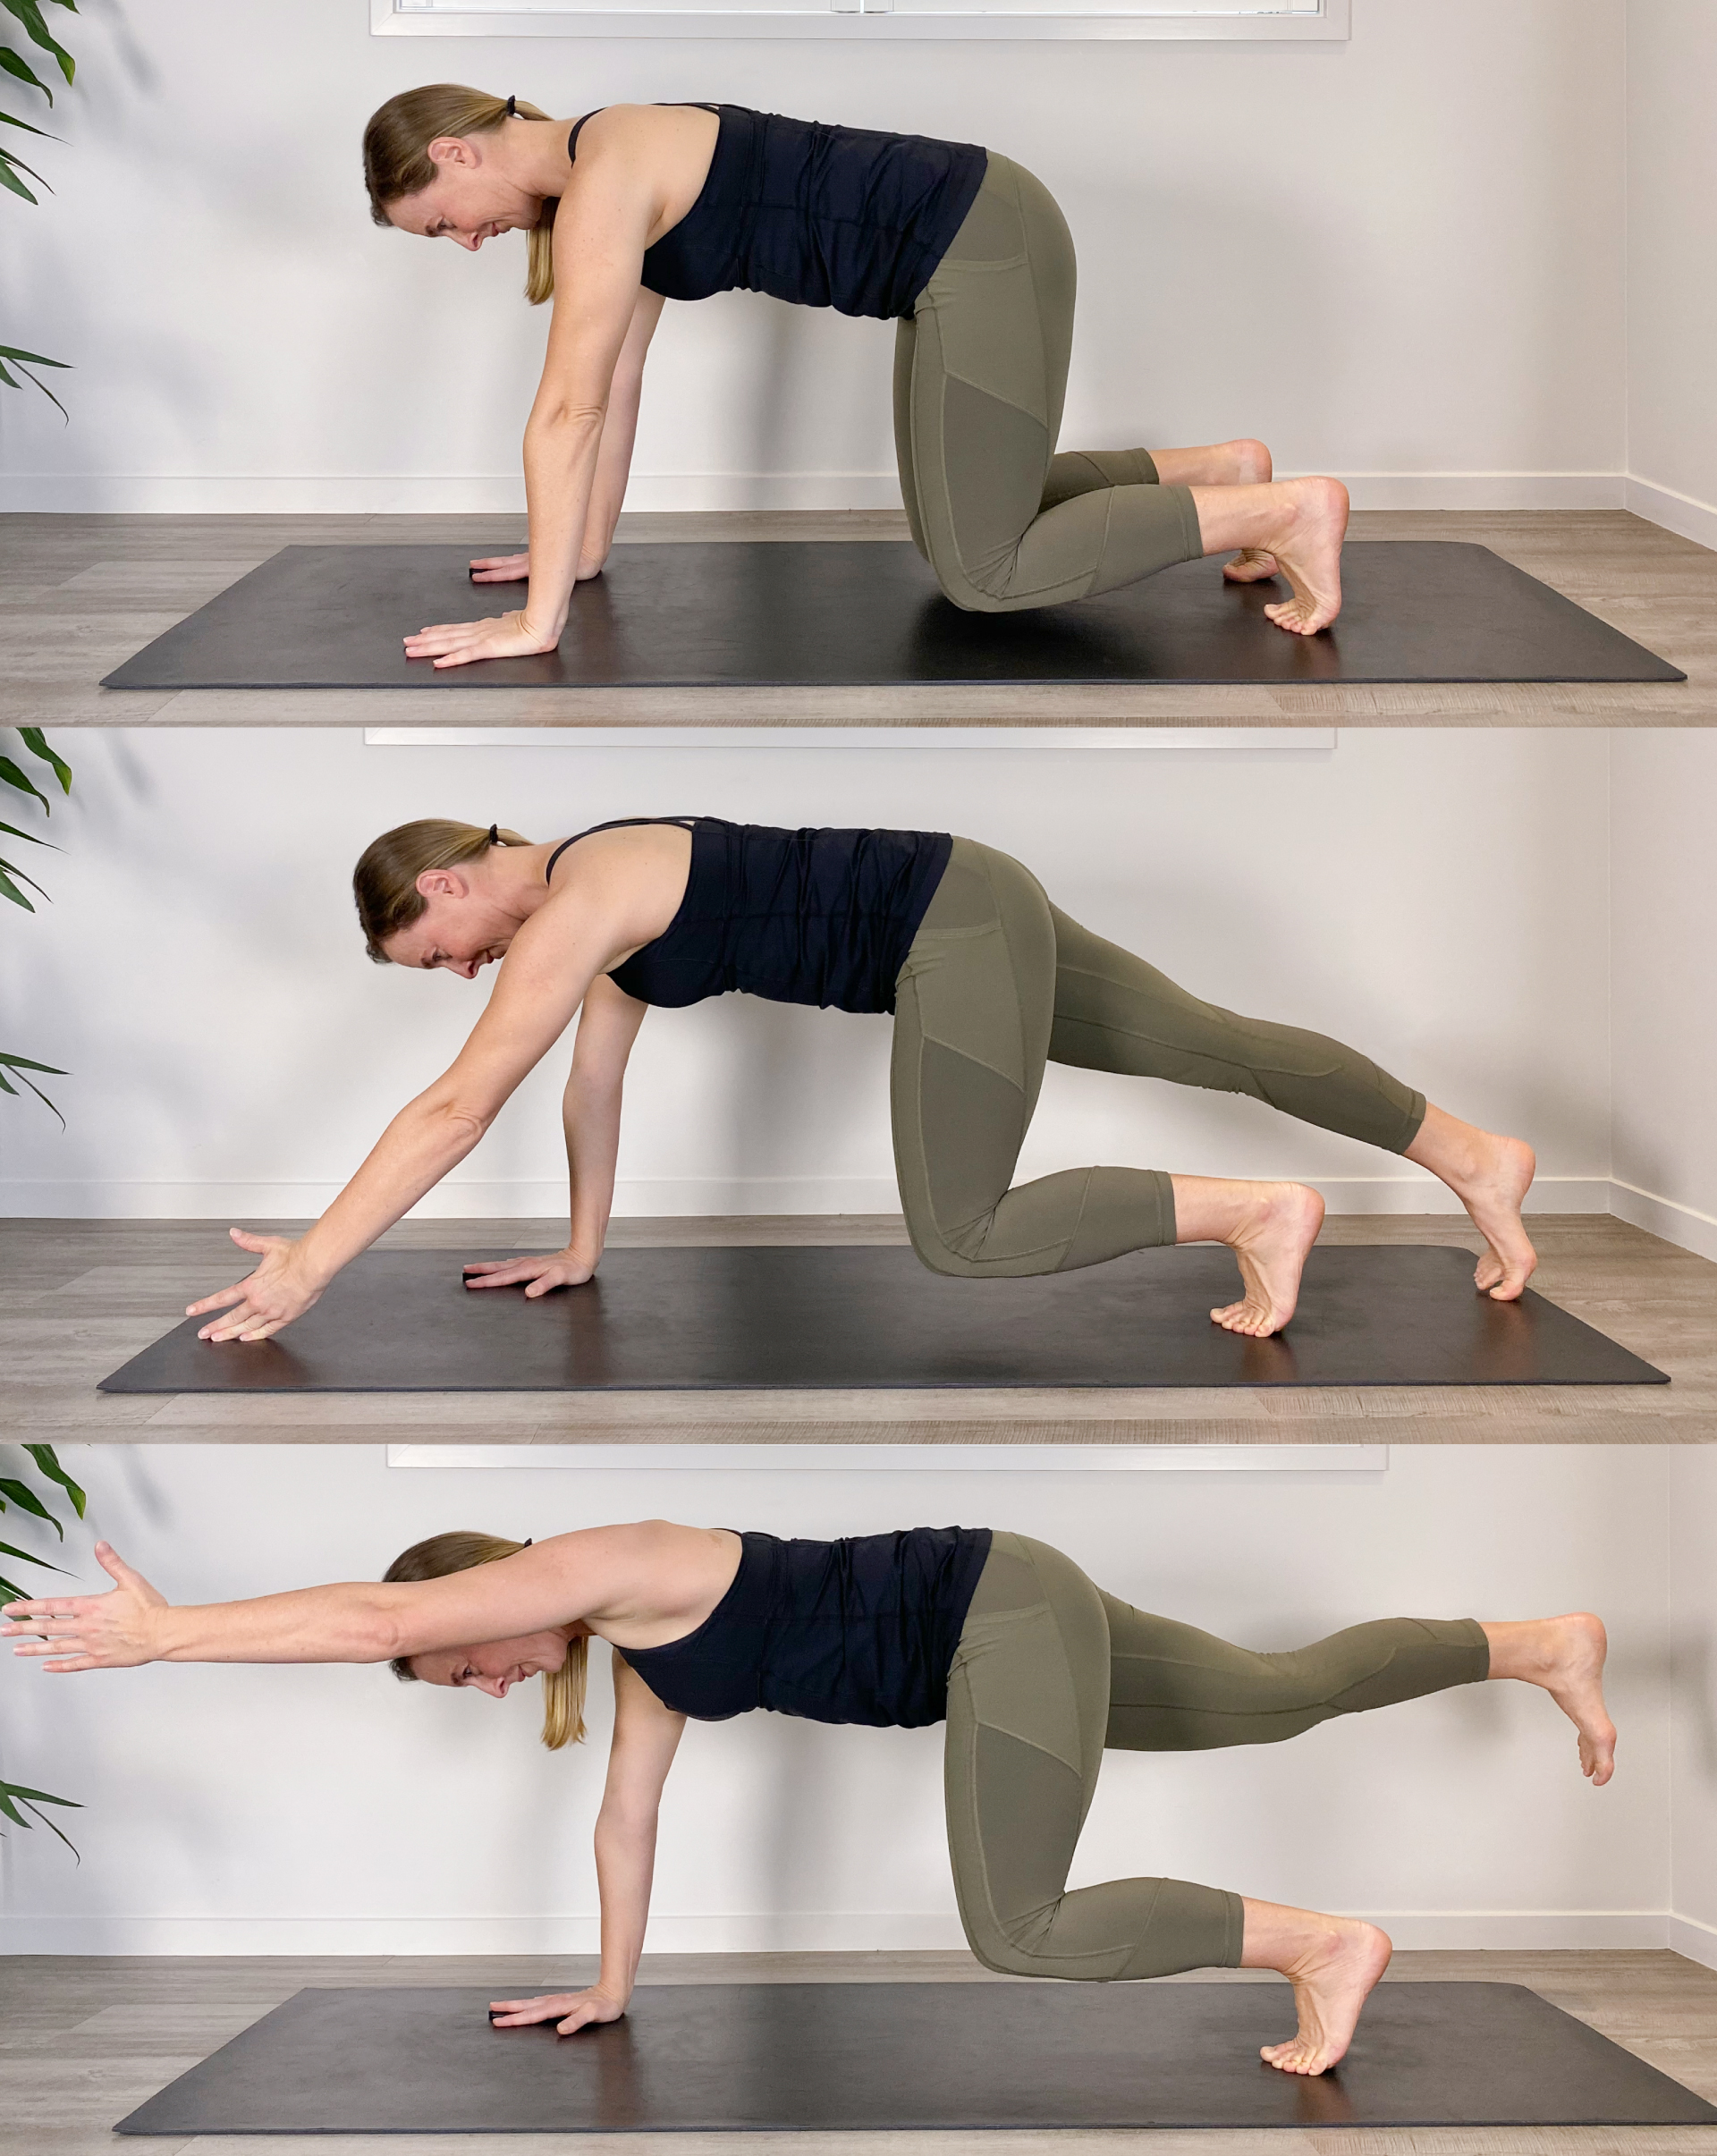 16 Yoga Poses to Keep You Grounded & Present